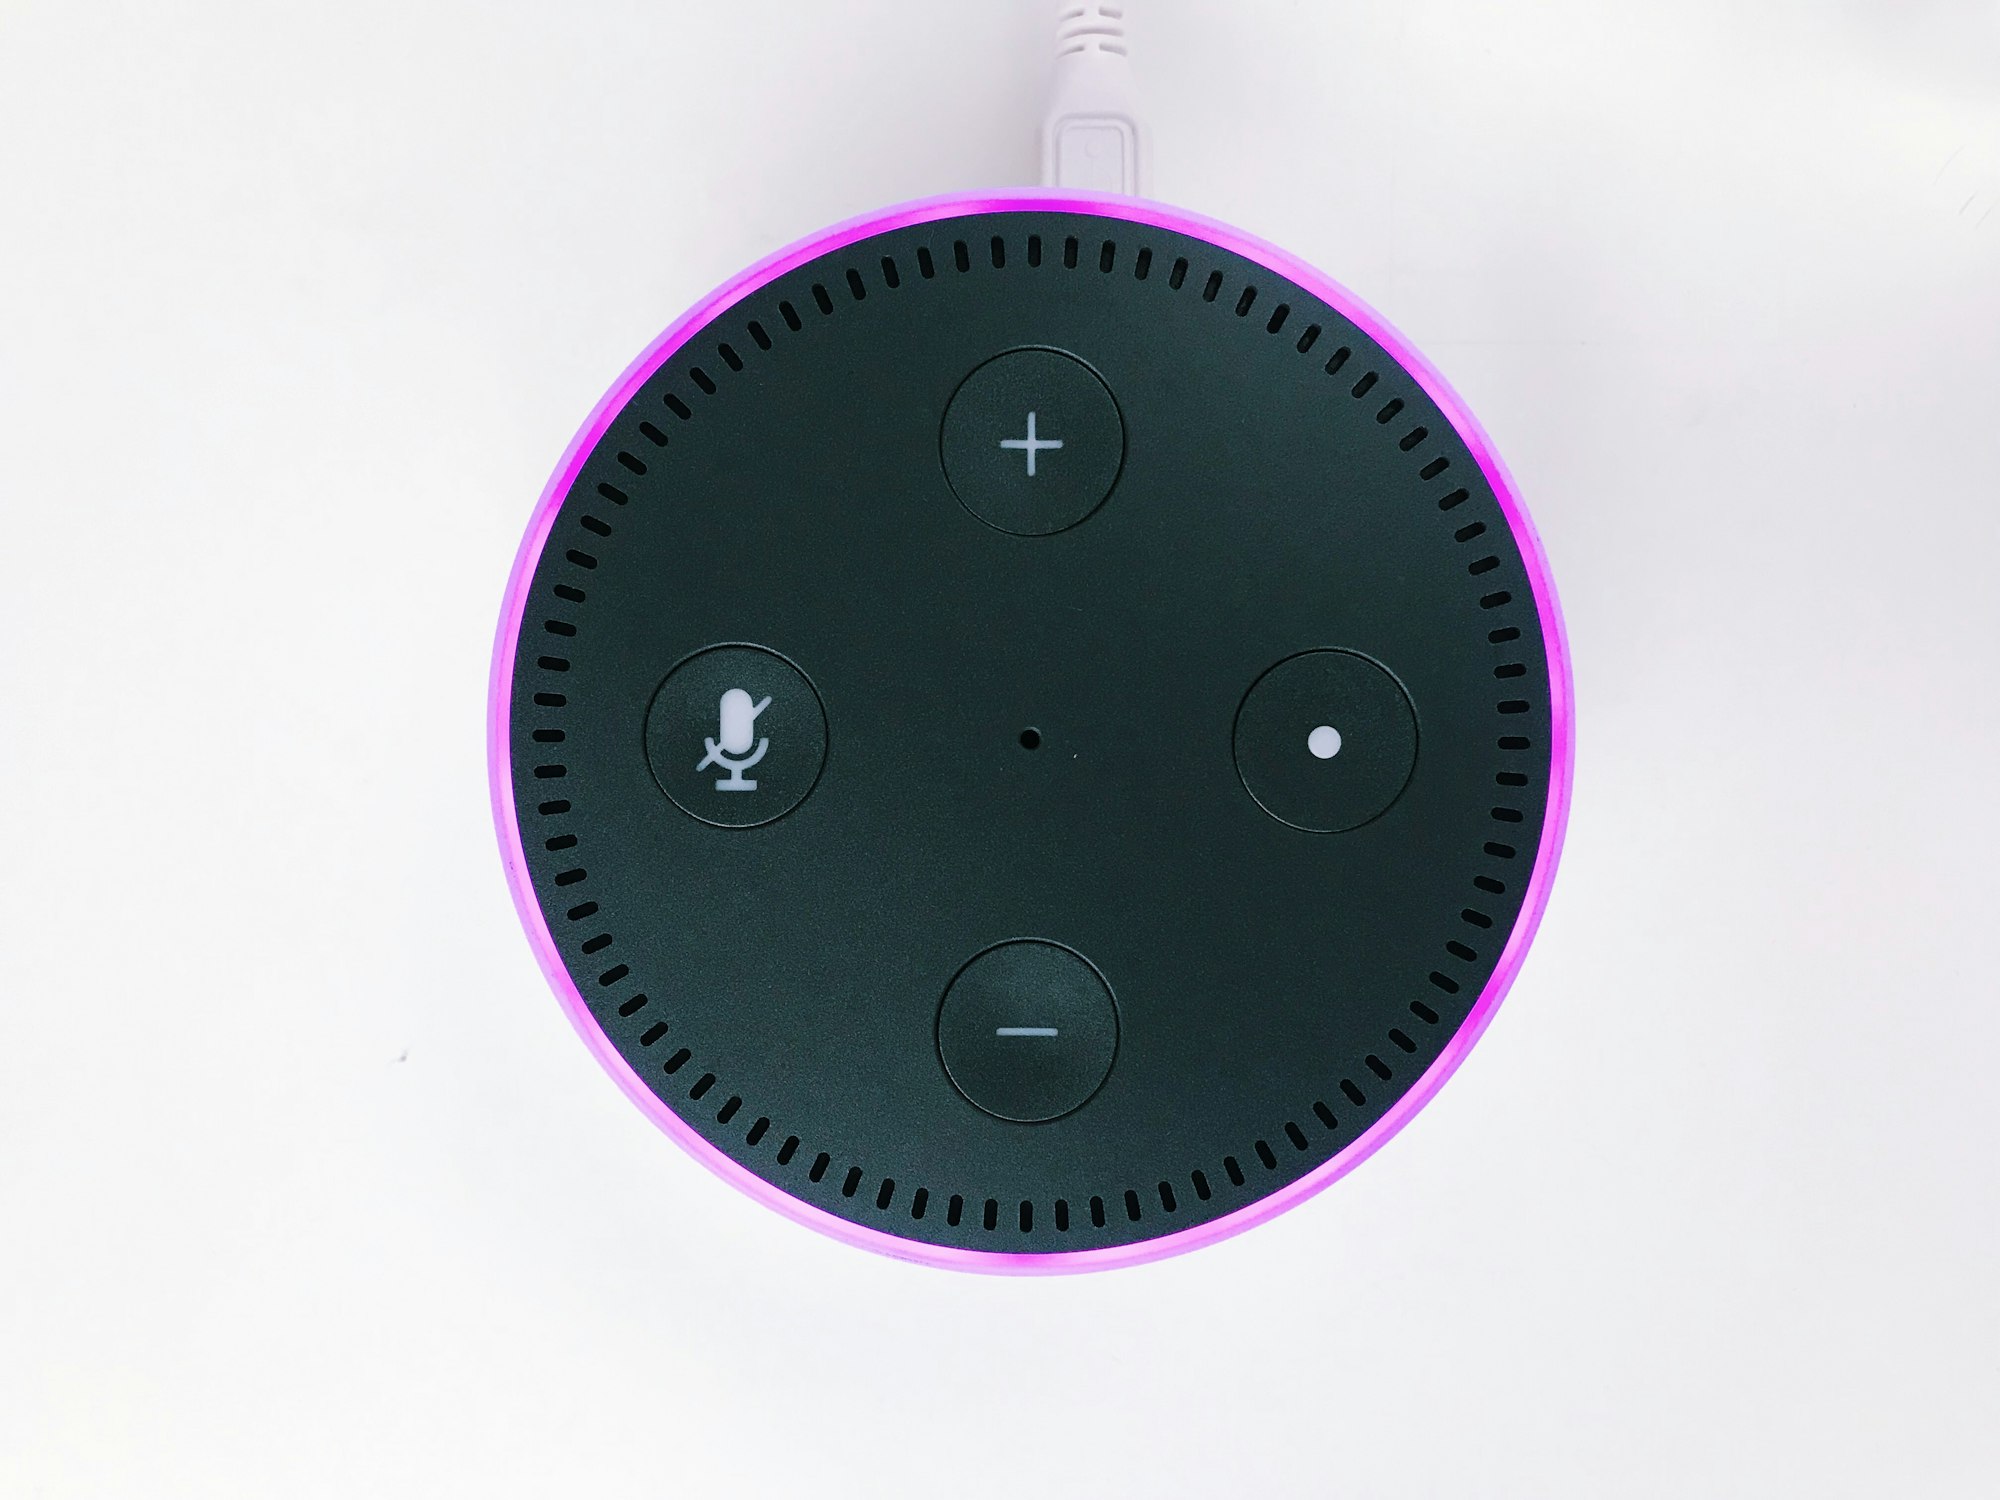 Creating an Alexa skill using the Command Line Interface (CLI)